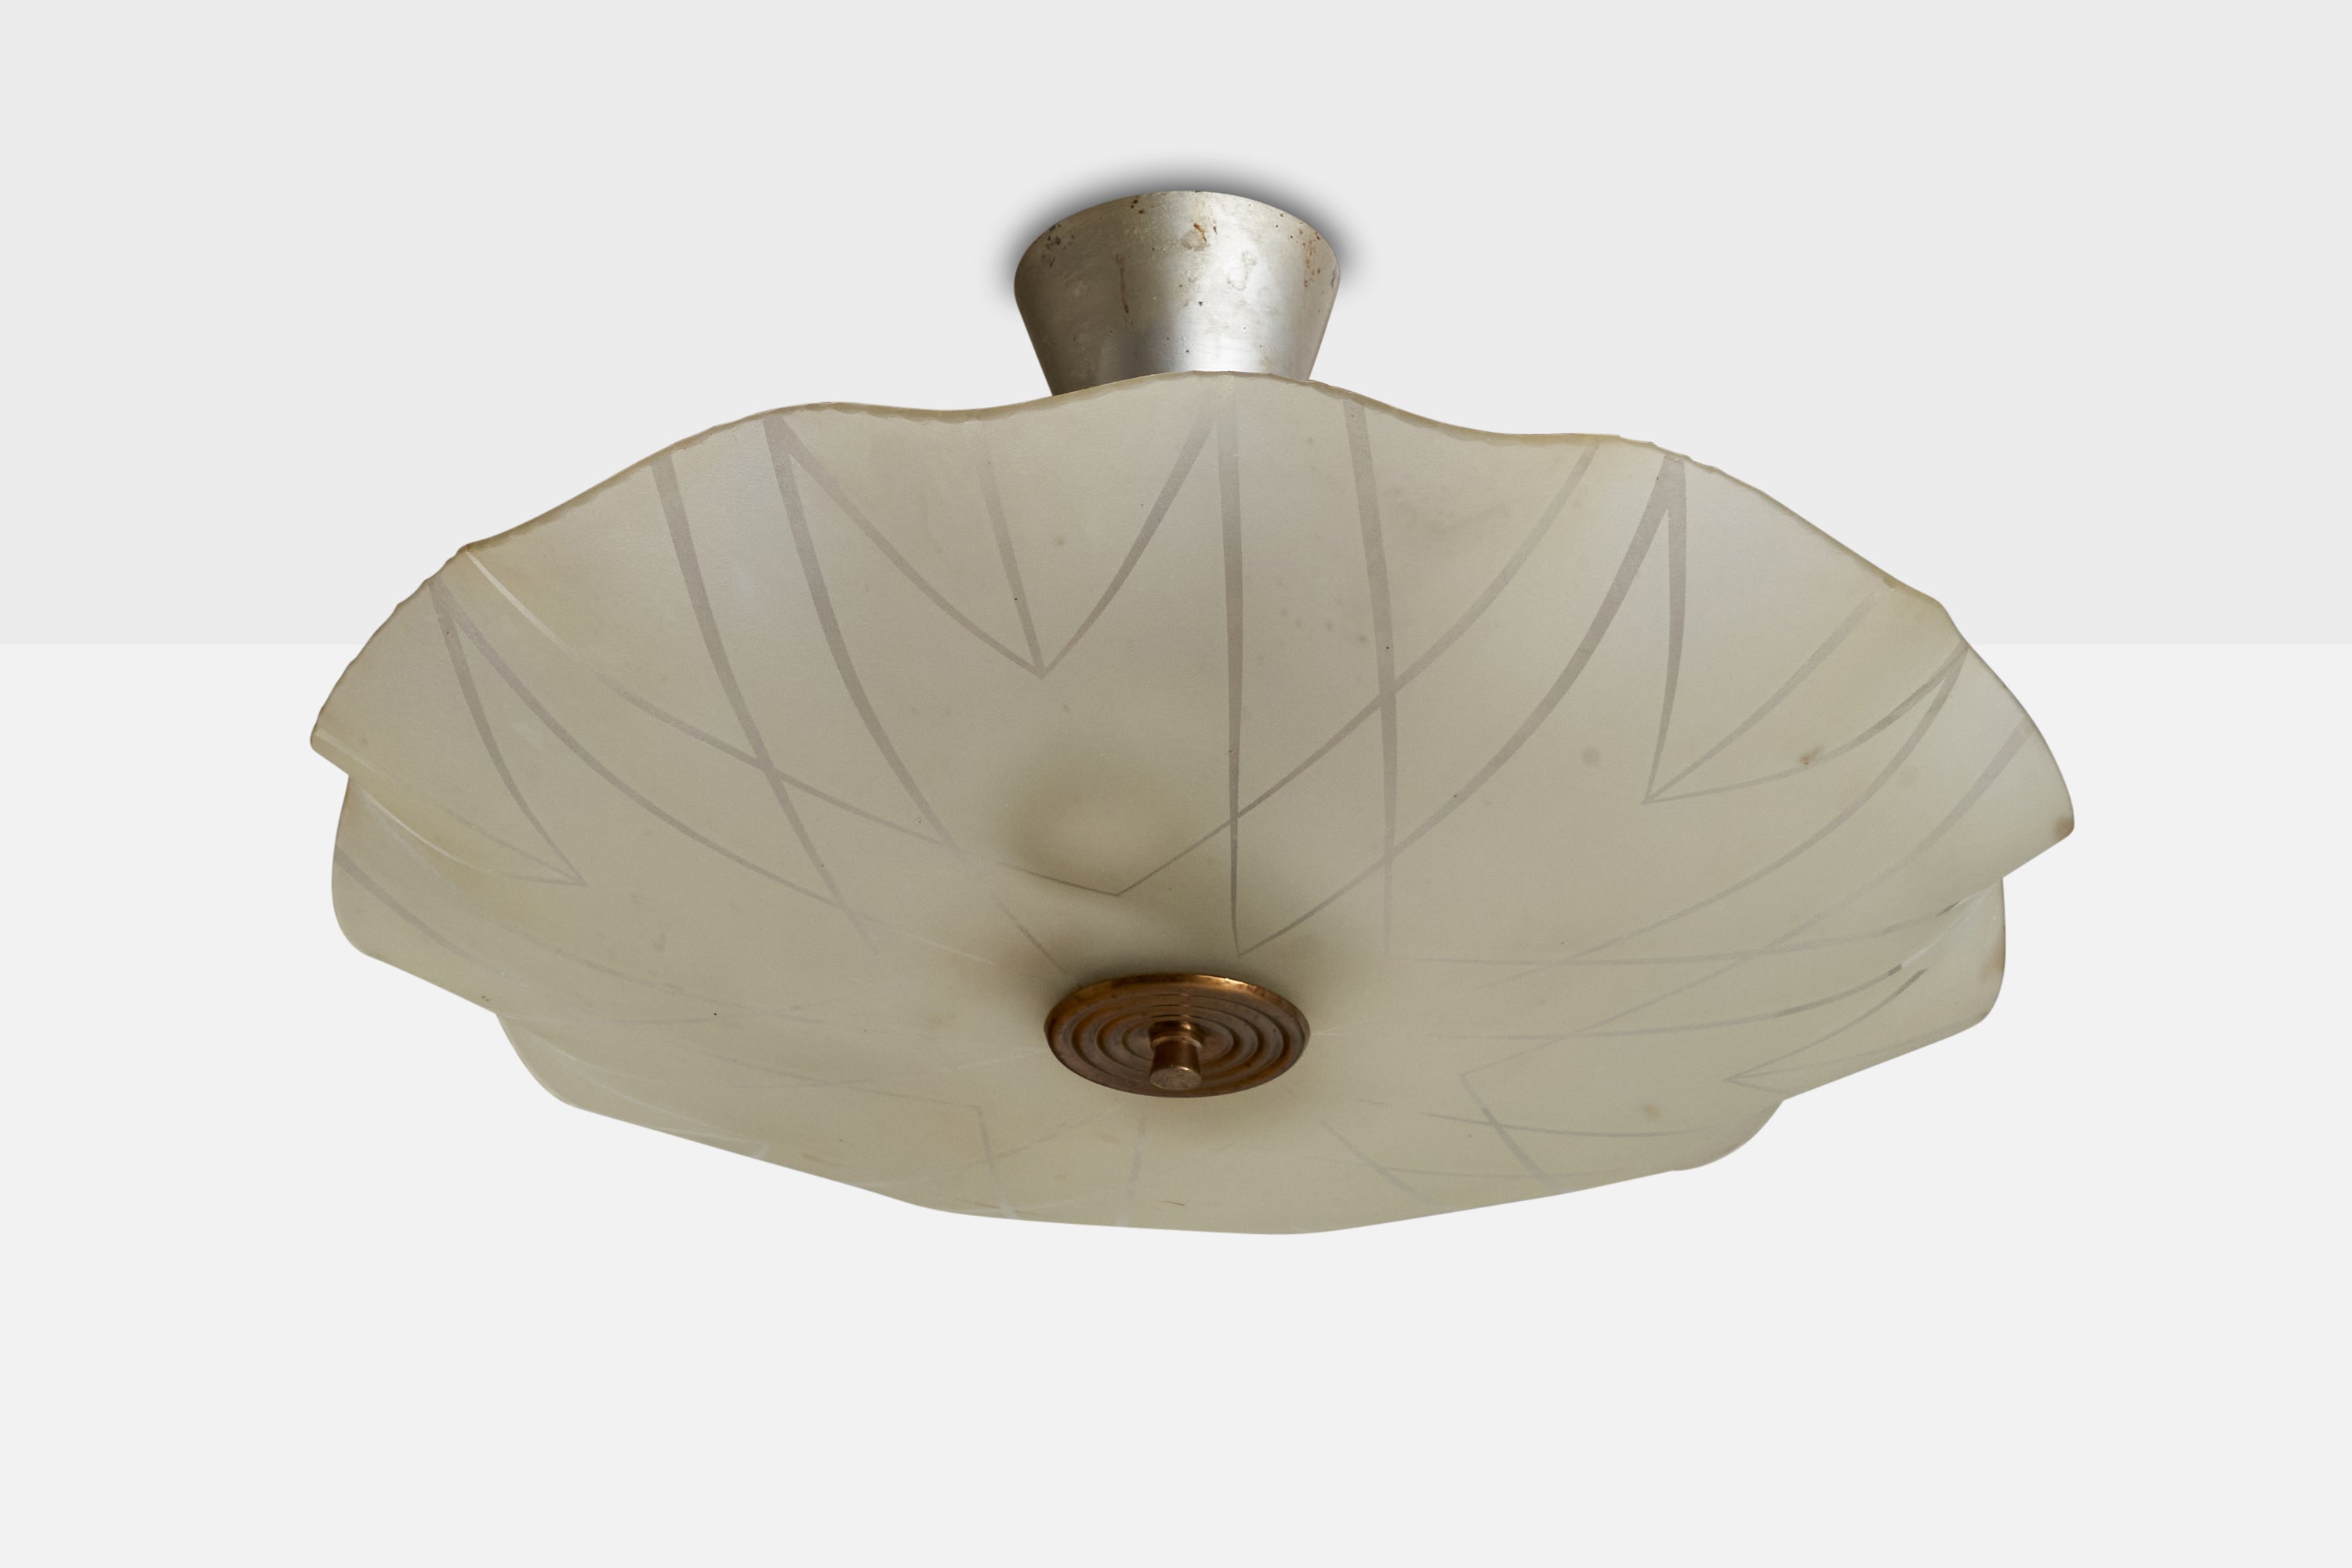 A brass, metal and etched glass pendant light designed and produced in Sweden, c. 1940s.

Dimensions of canopy (inches): 3.66” H x 2.96”Diameter
Socket takes standard E-26 bulbs. 2 socket.There is no maximum wattage stated on the fixture. All